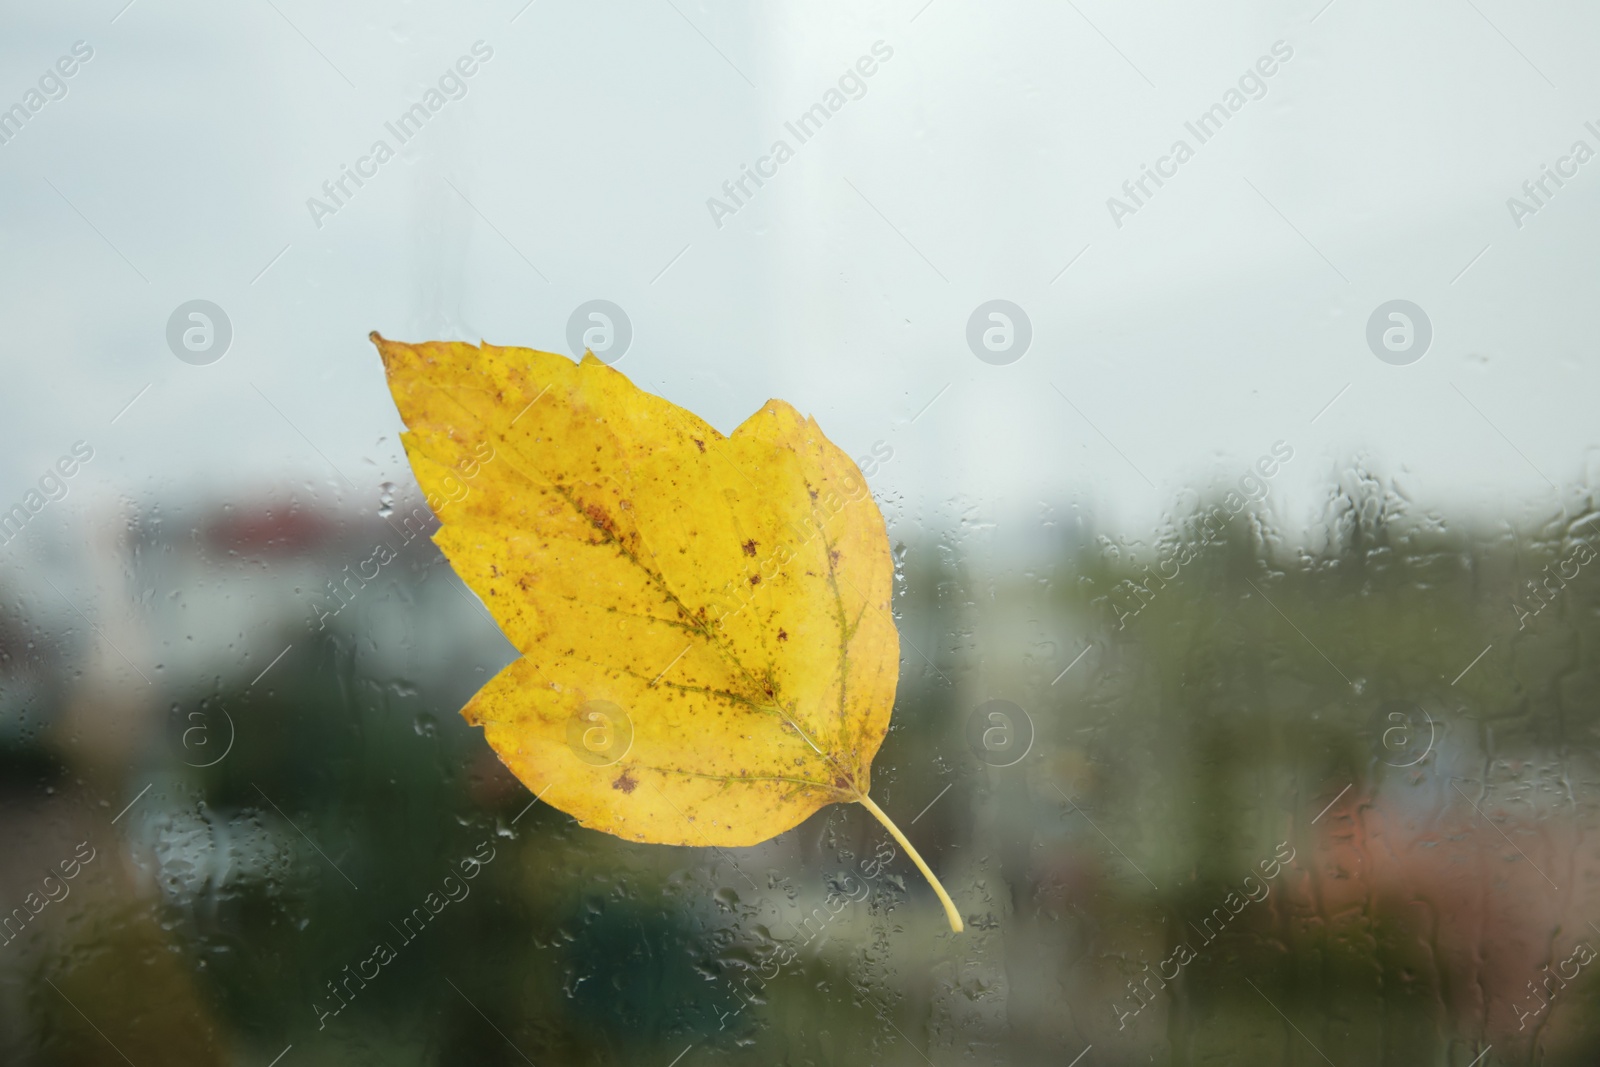 Photo of Autumn leaf stuck to window glass on rainy day, space for text